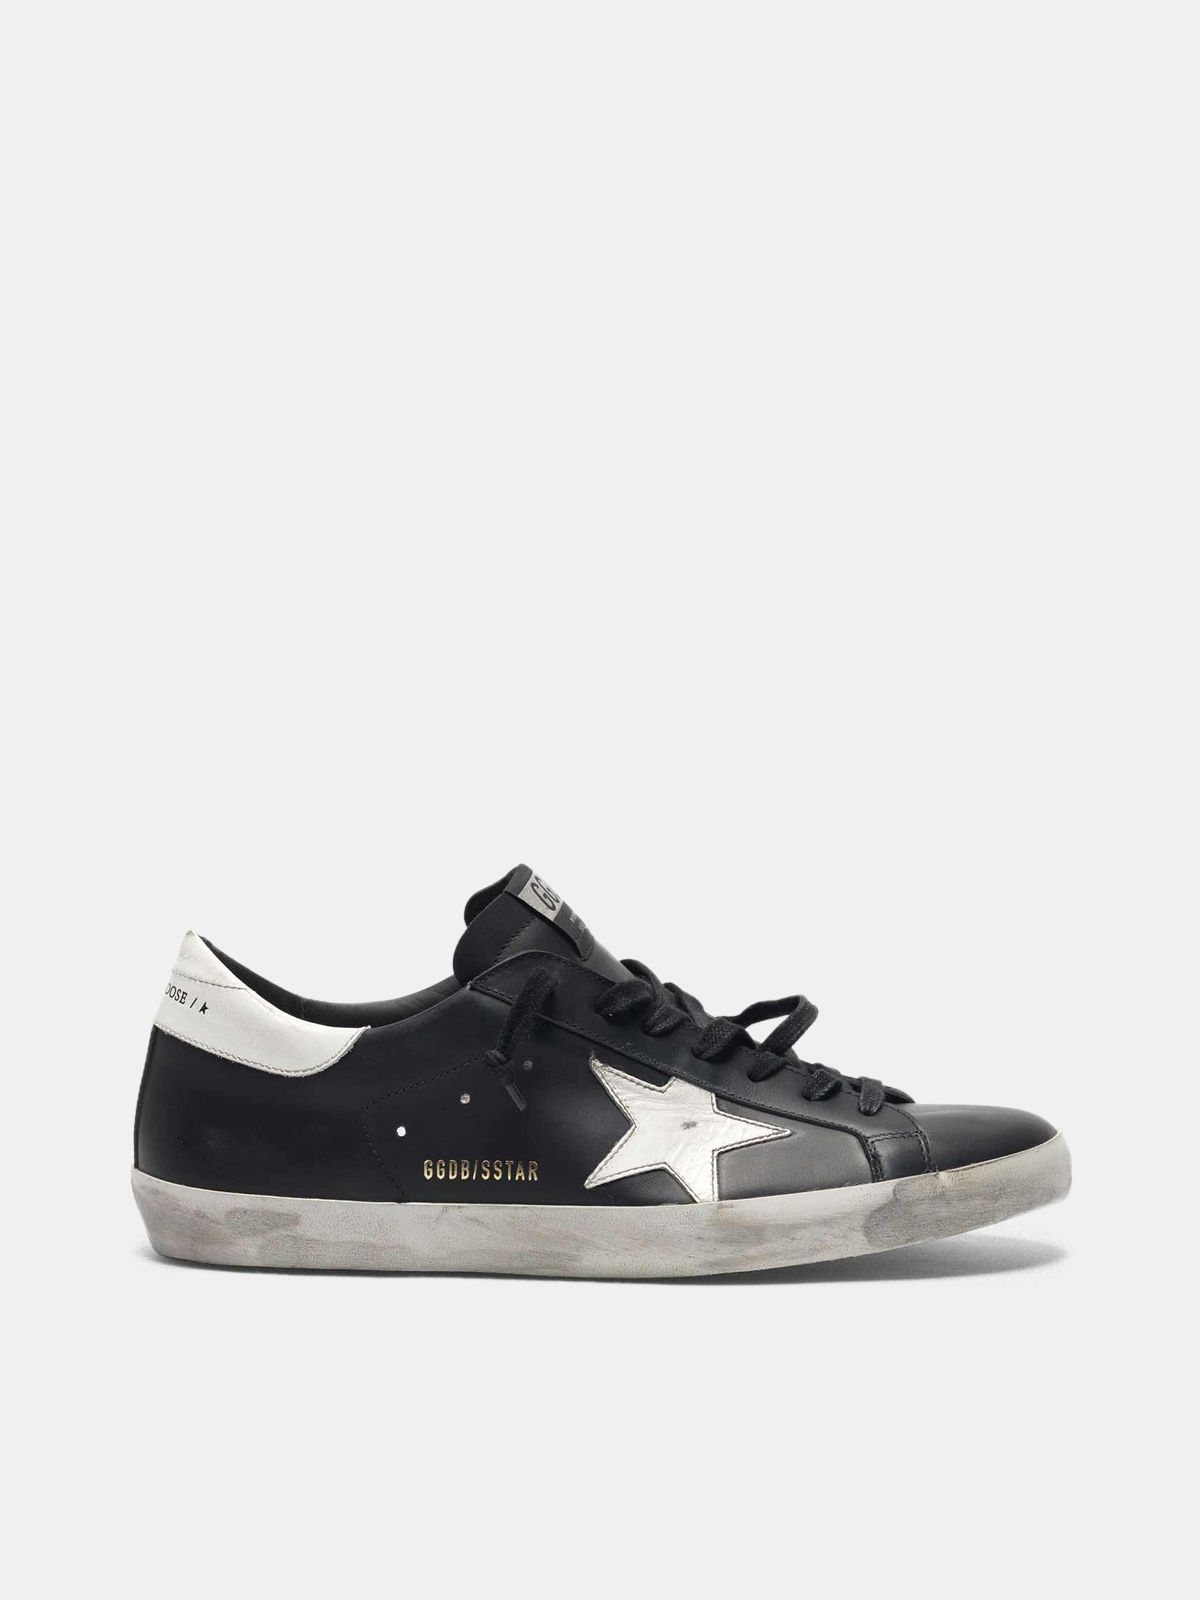 golden goose sneakers black and white